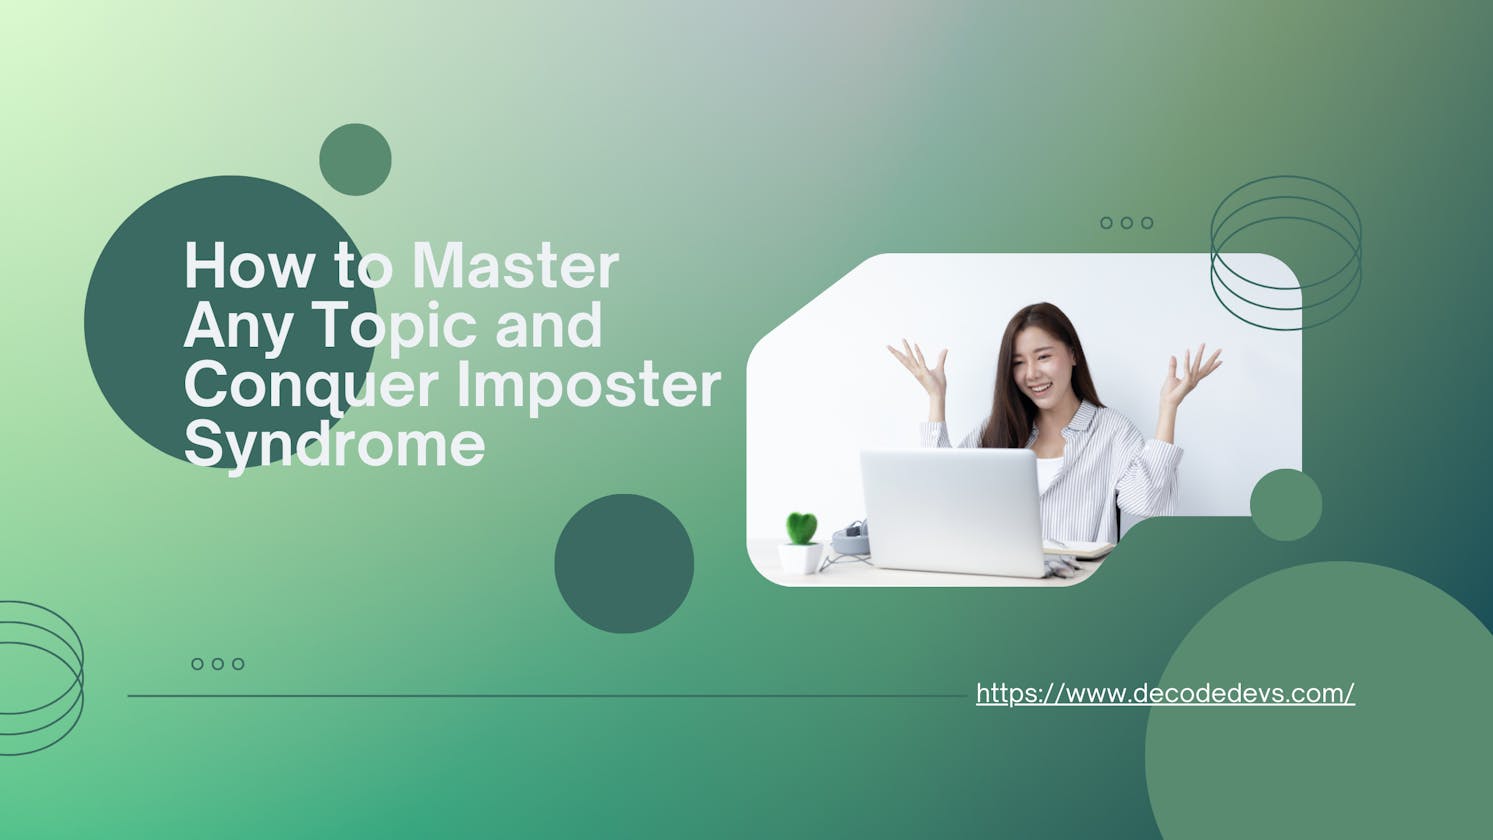 How to Master Any Topic and Conquer Imposter Syndrome